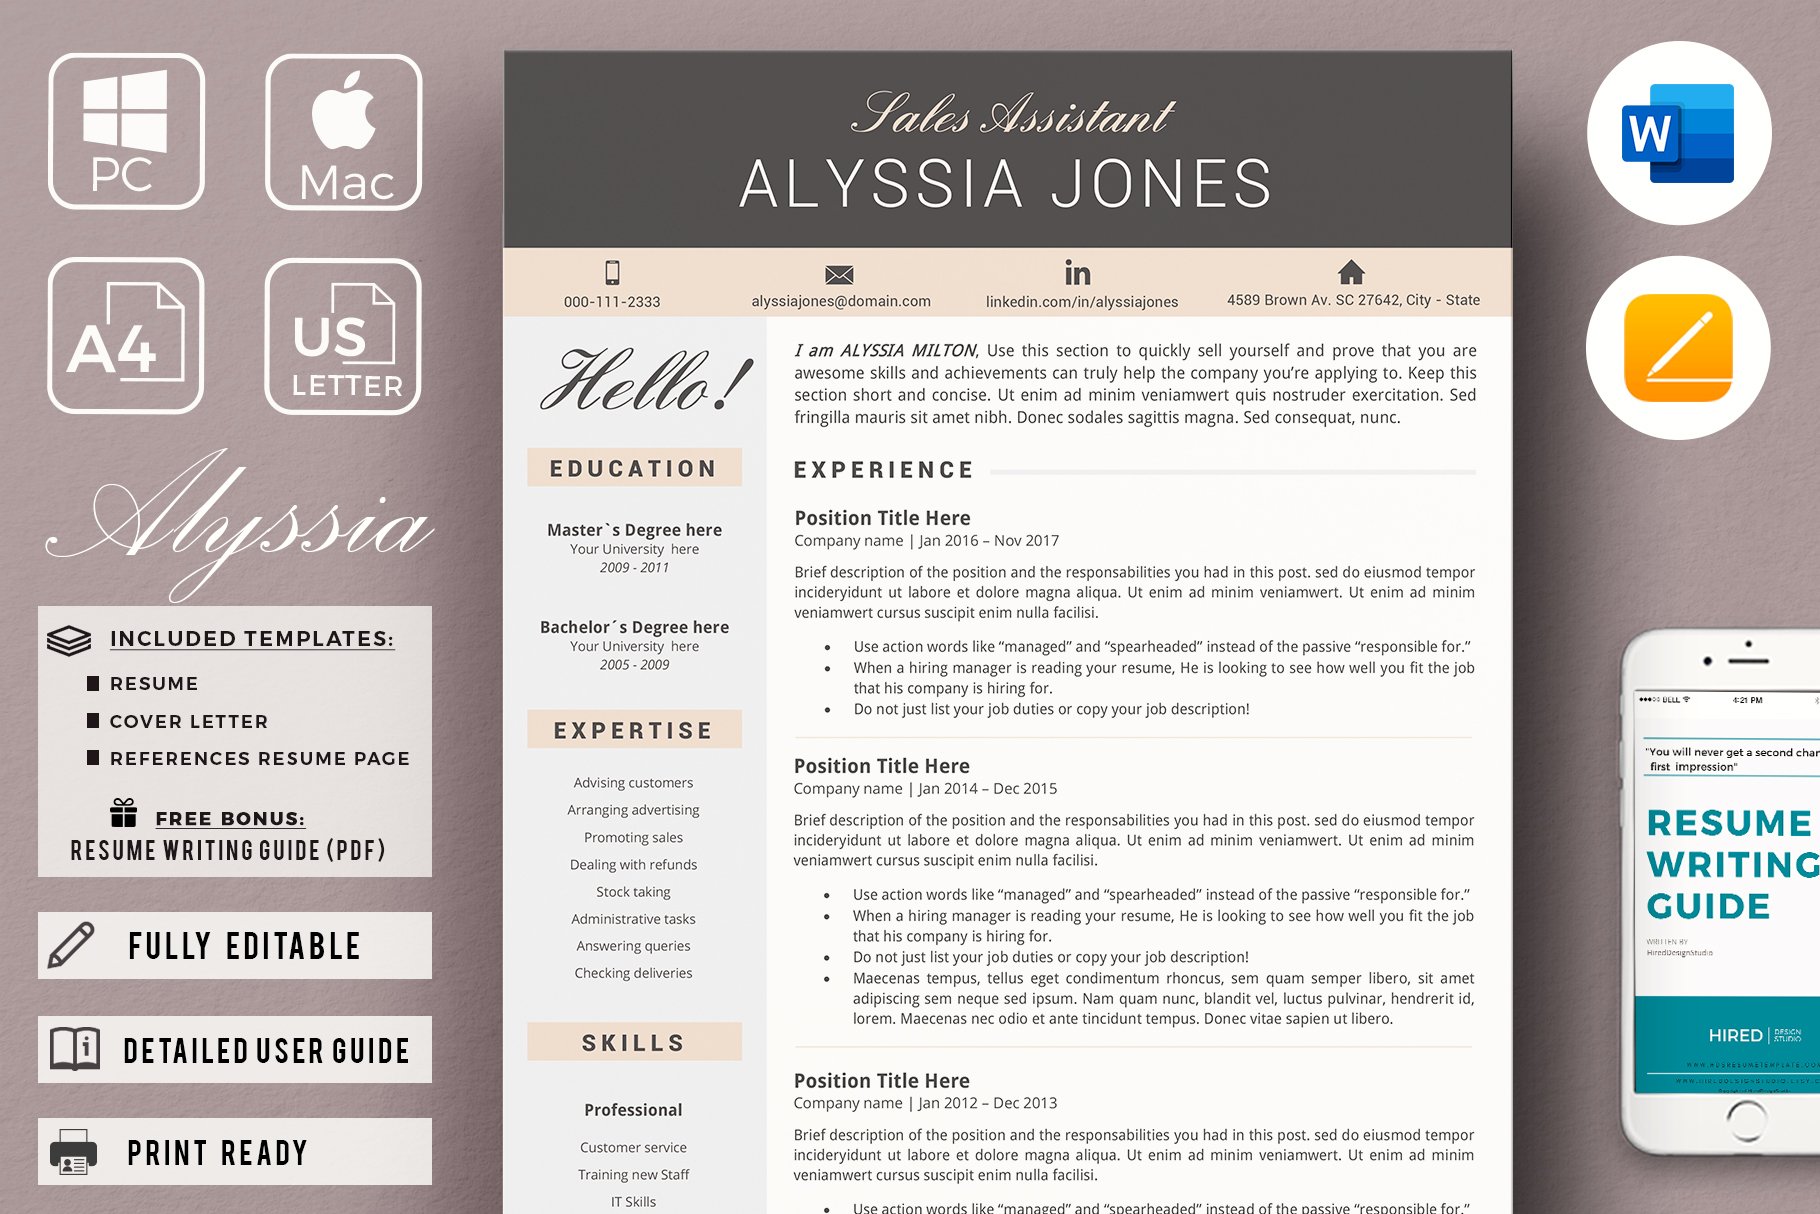 Sales Assistant Resume CV Template cover image.